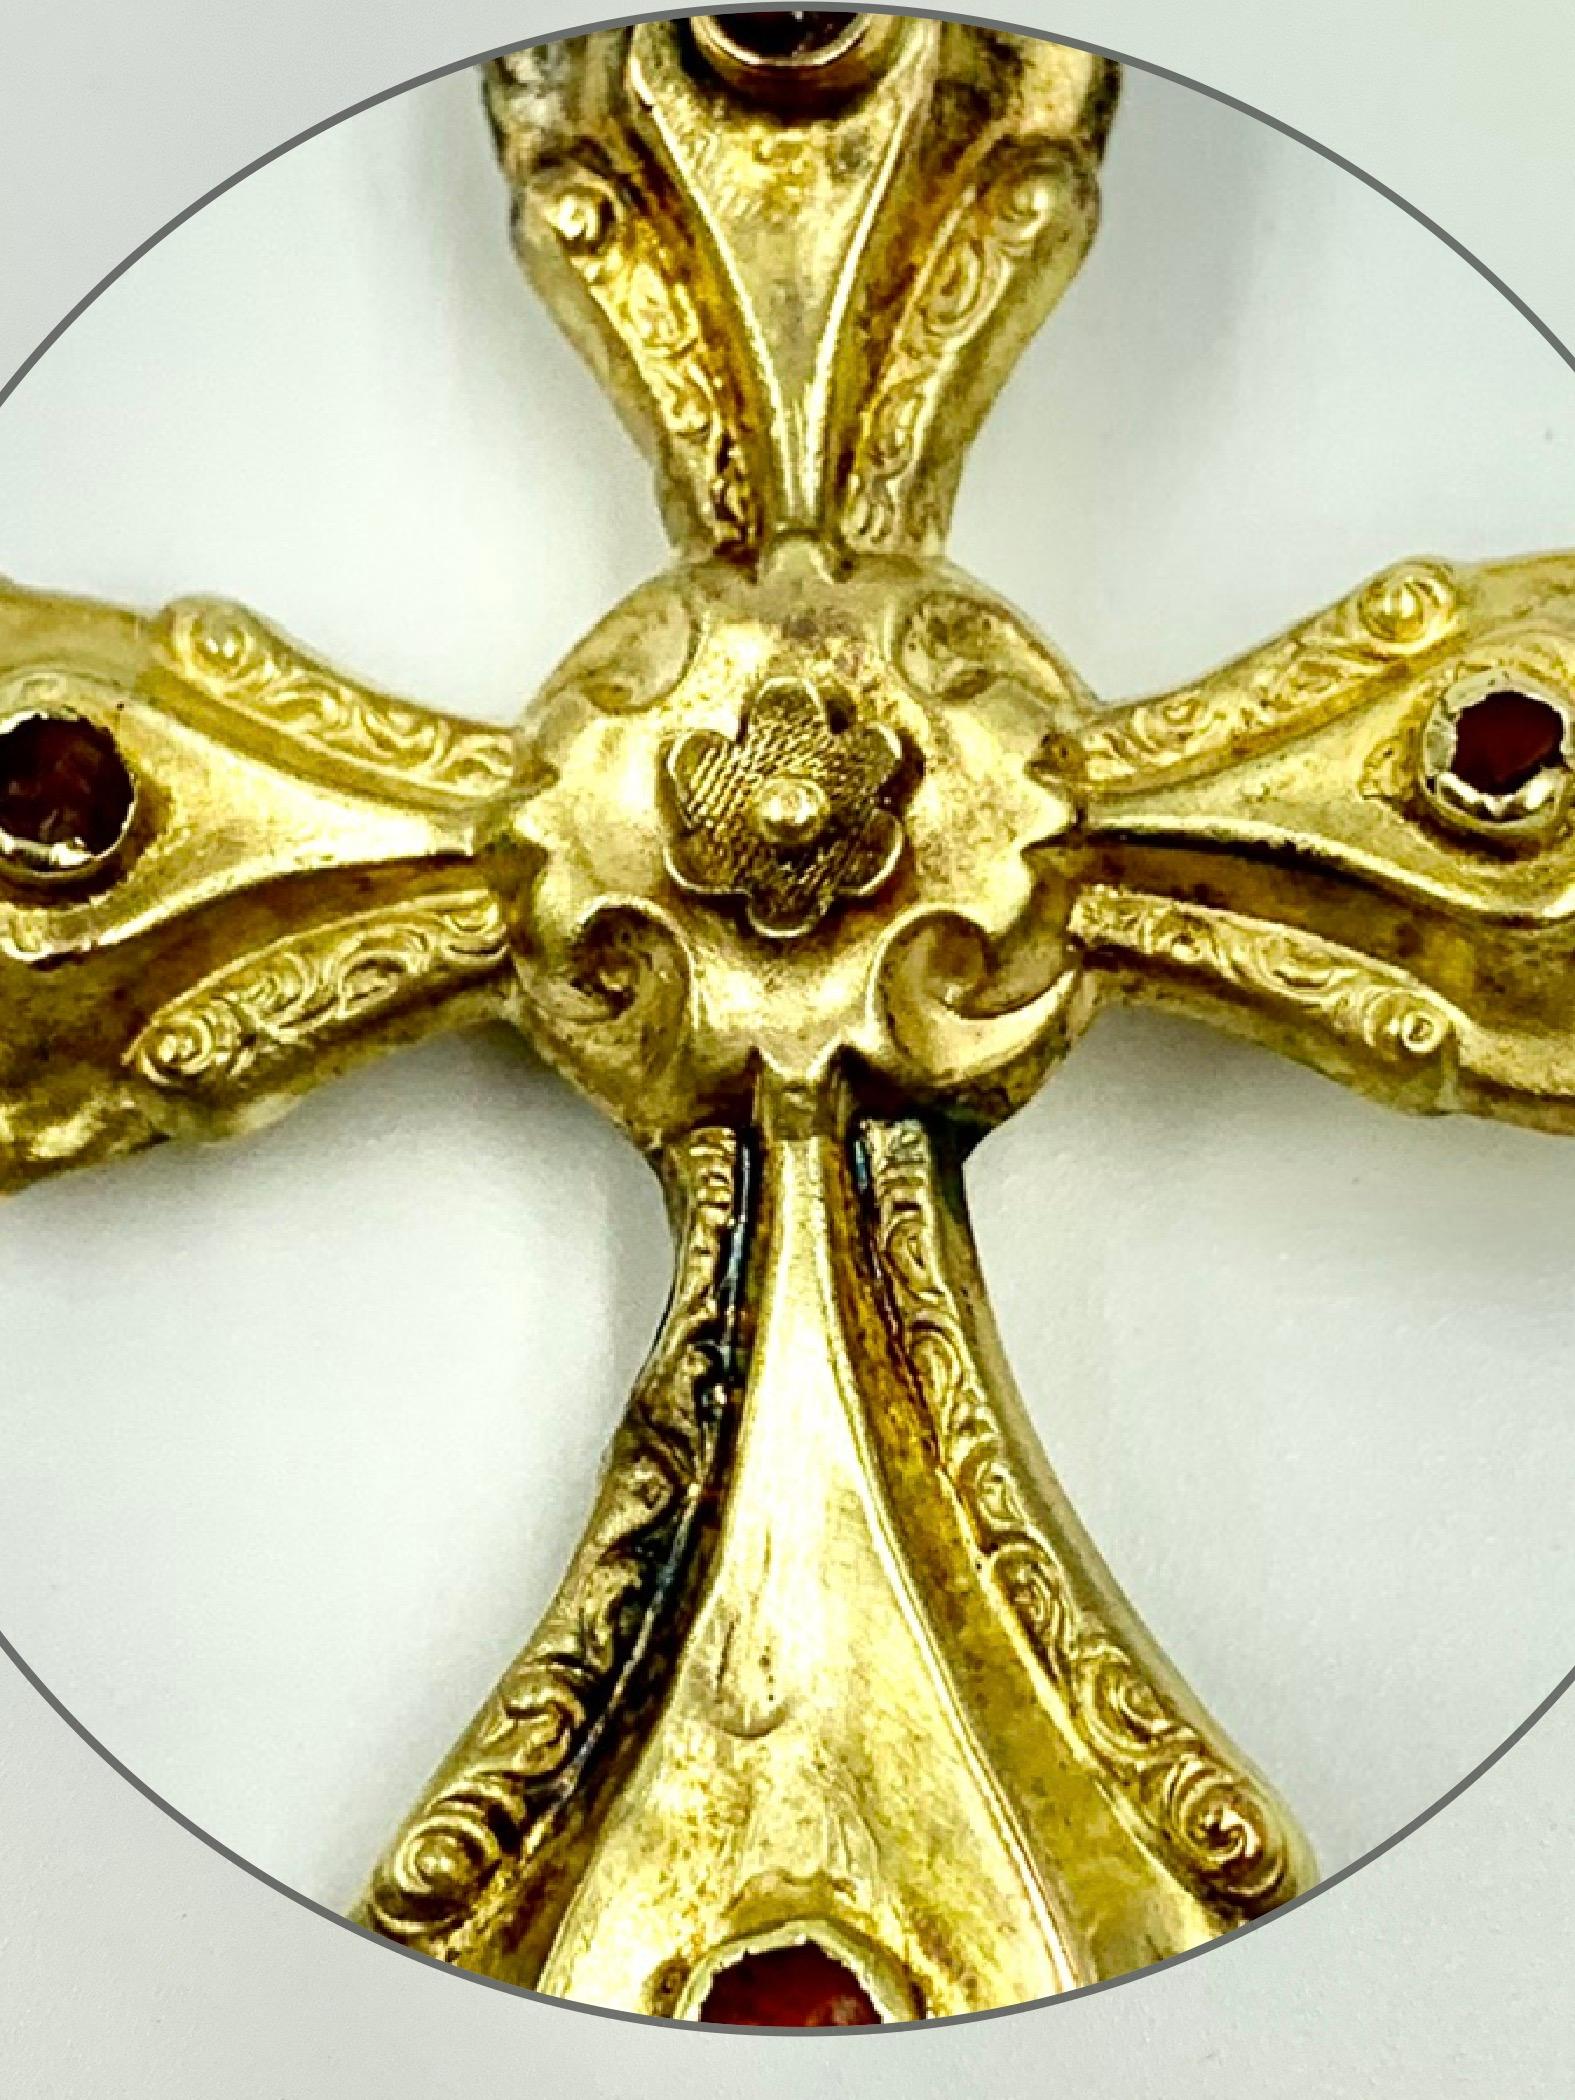 Ornate Baroque period museum quality gold cross with cabochon carnelian rondels on each of the arms and an engraved floral center depicting a stylized rose. 
17th Century
The Rose is a symbol of Rosicrucianism, a spiritual and cultural movement